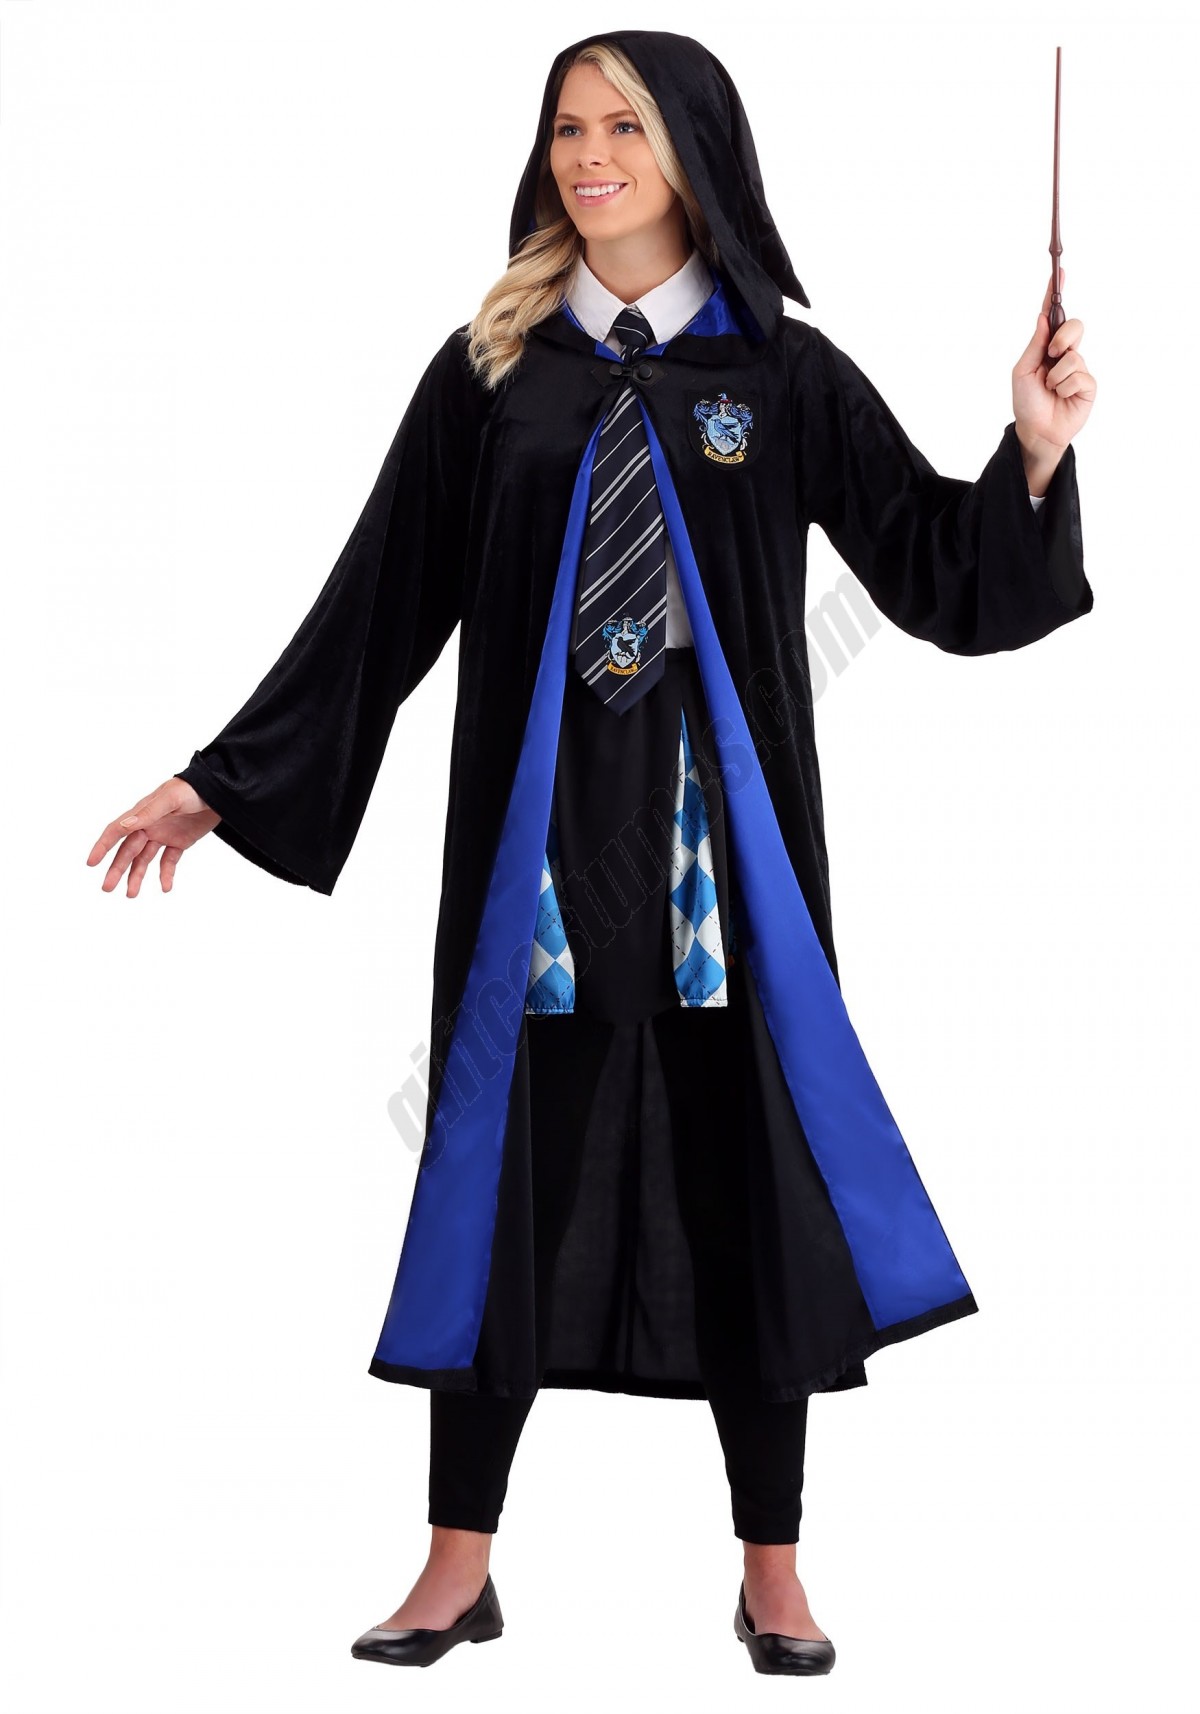 Deluxe Harry Potter Adult Plus Size Ravenclaw Robe Costume Promotions - -4